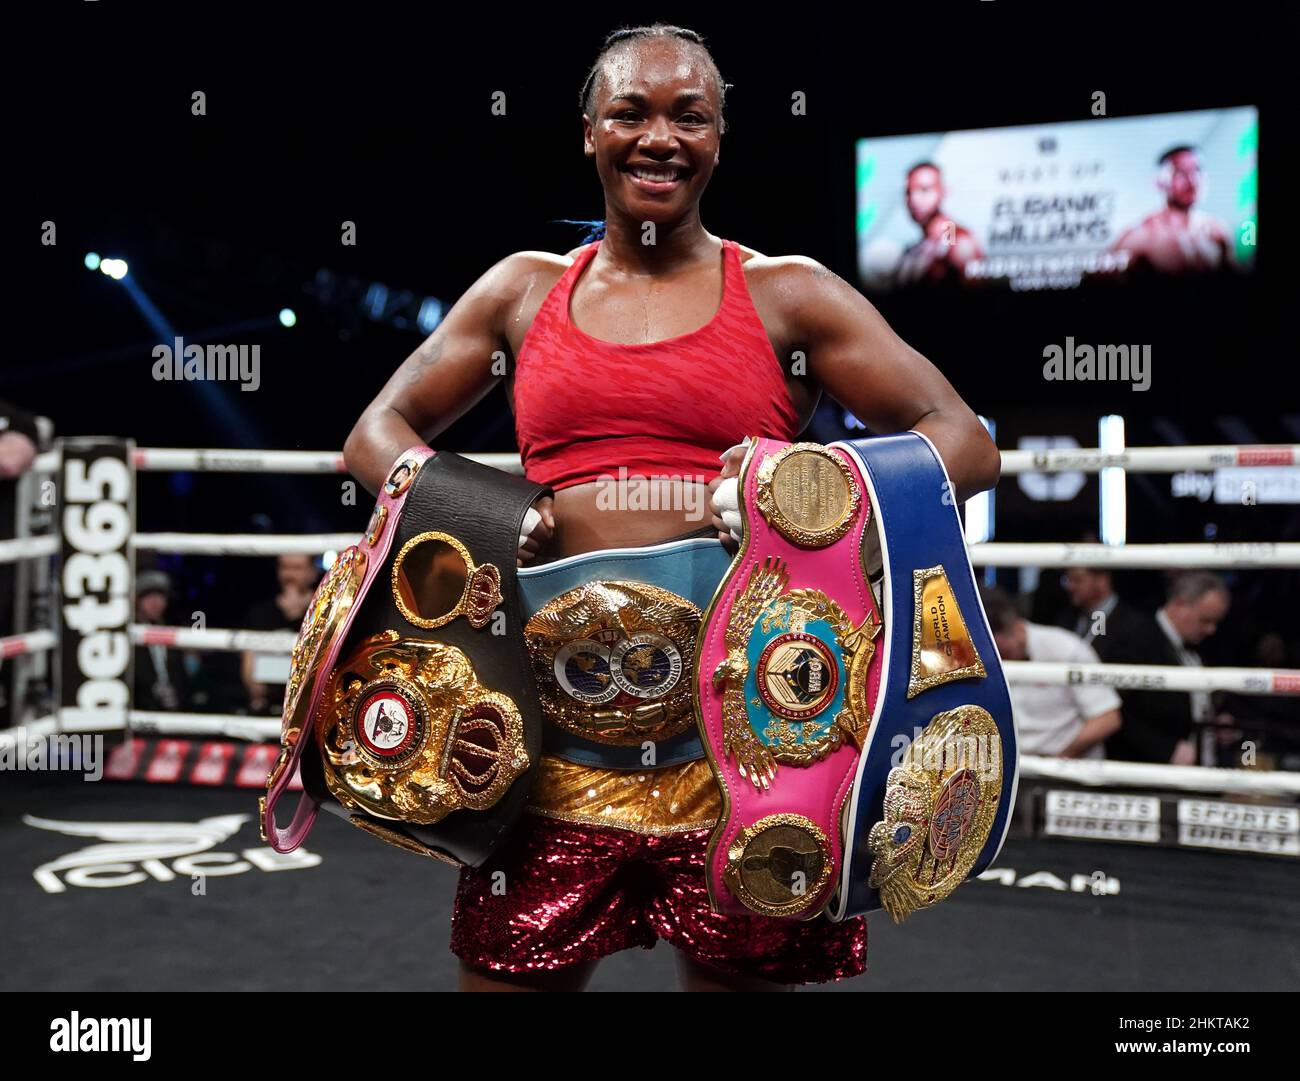 Claressa Shields celebrates victory against Ema Kozin (not pictured) in the WBC/WBA/IBF World Middleweight Titles at the Motorpoint Arena Cardiff